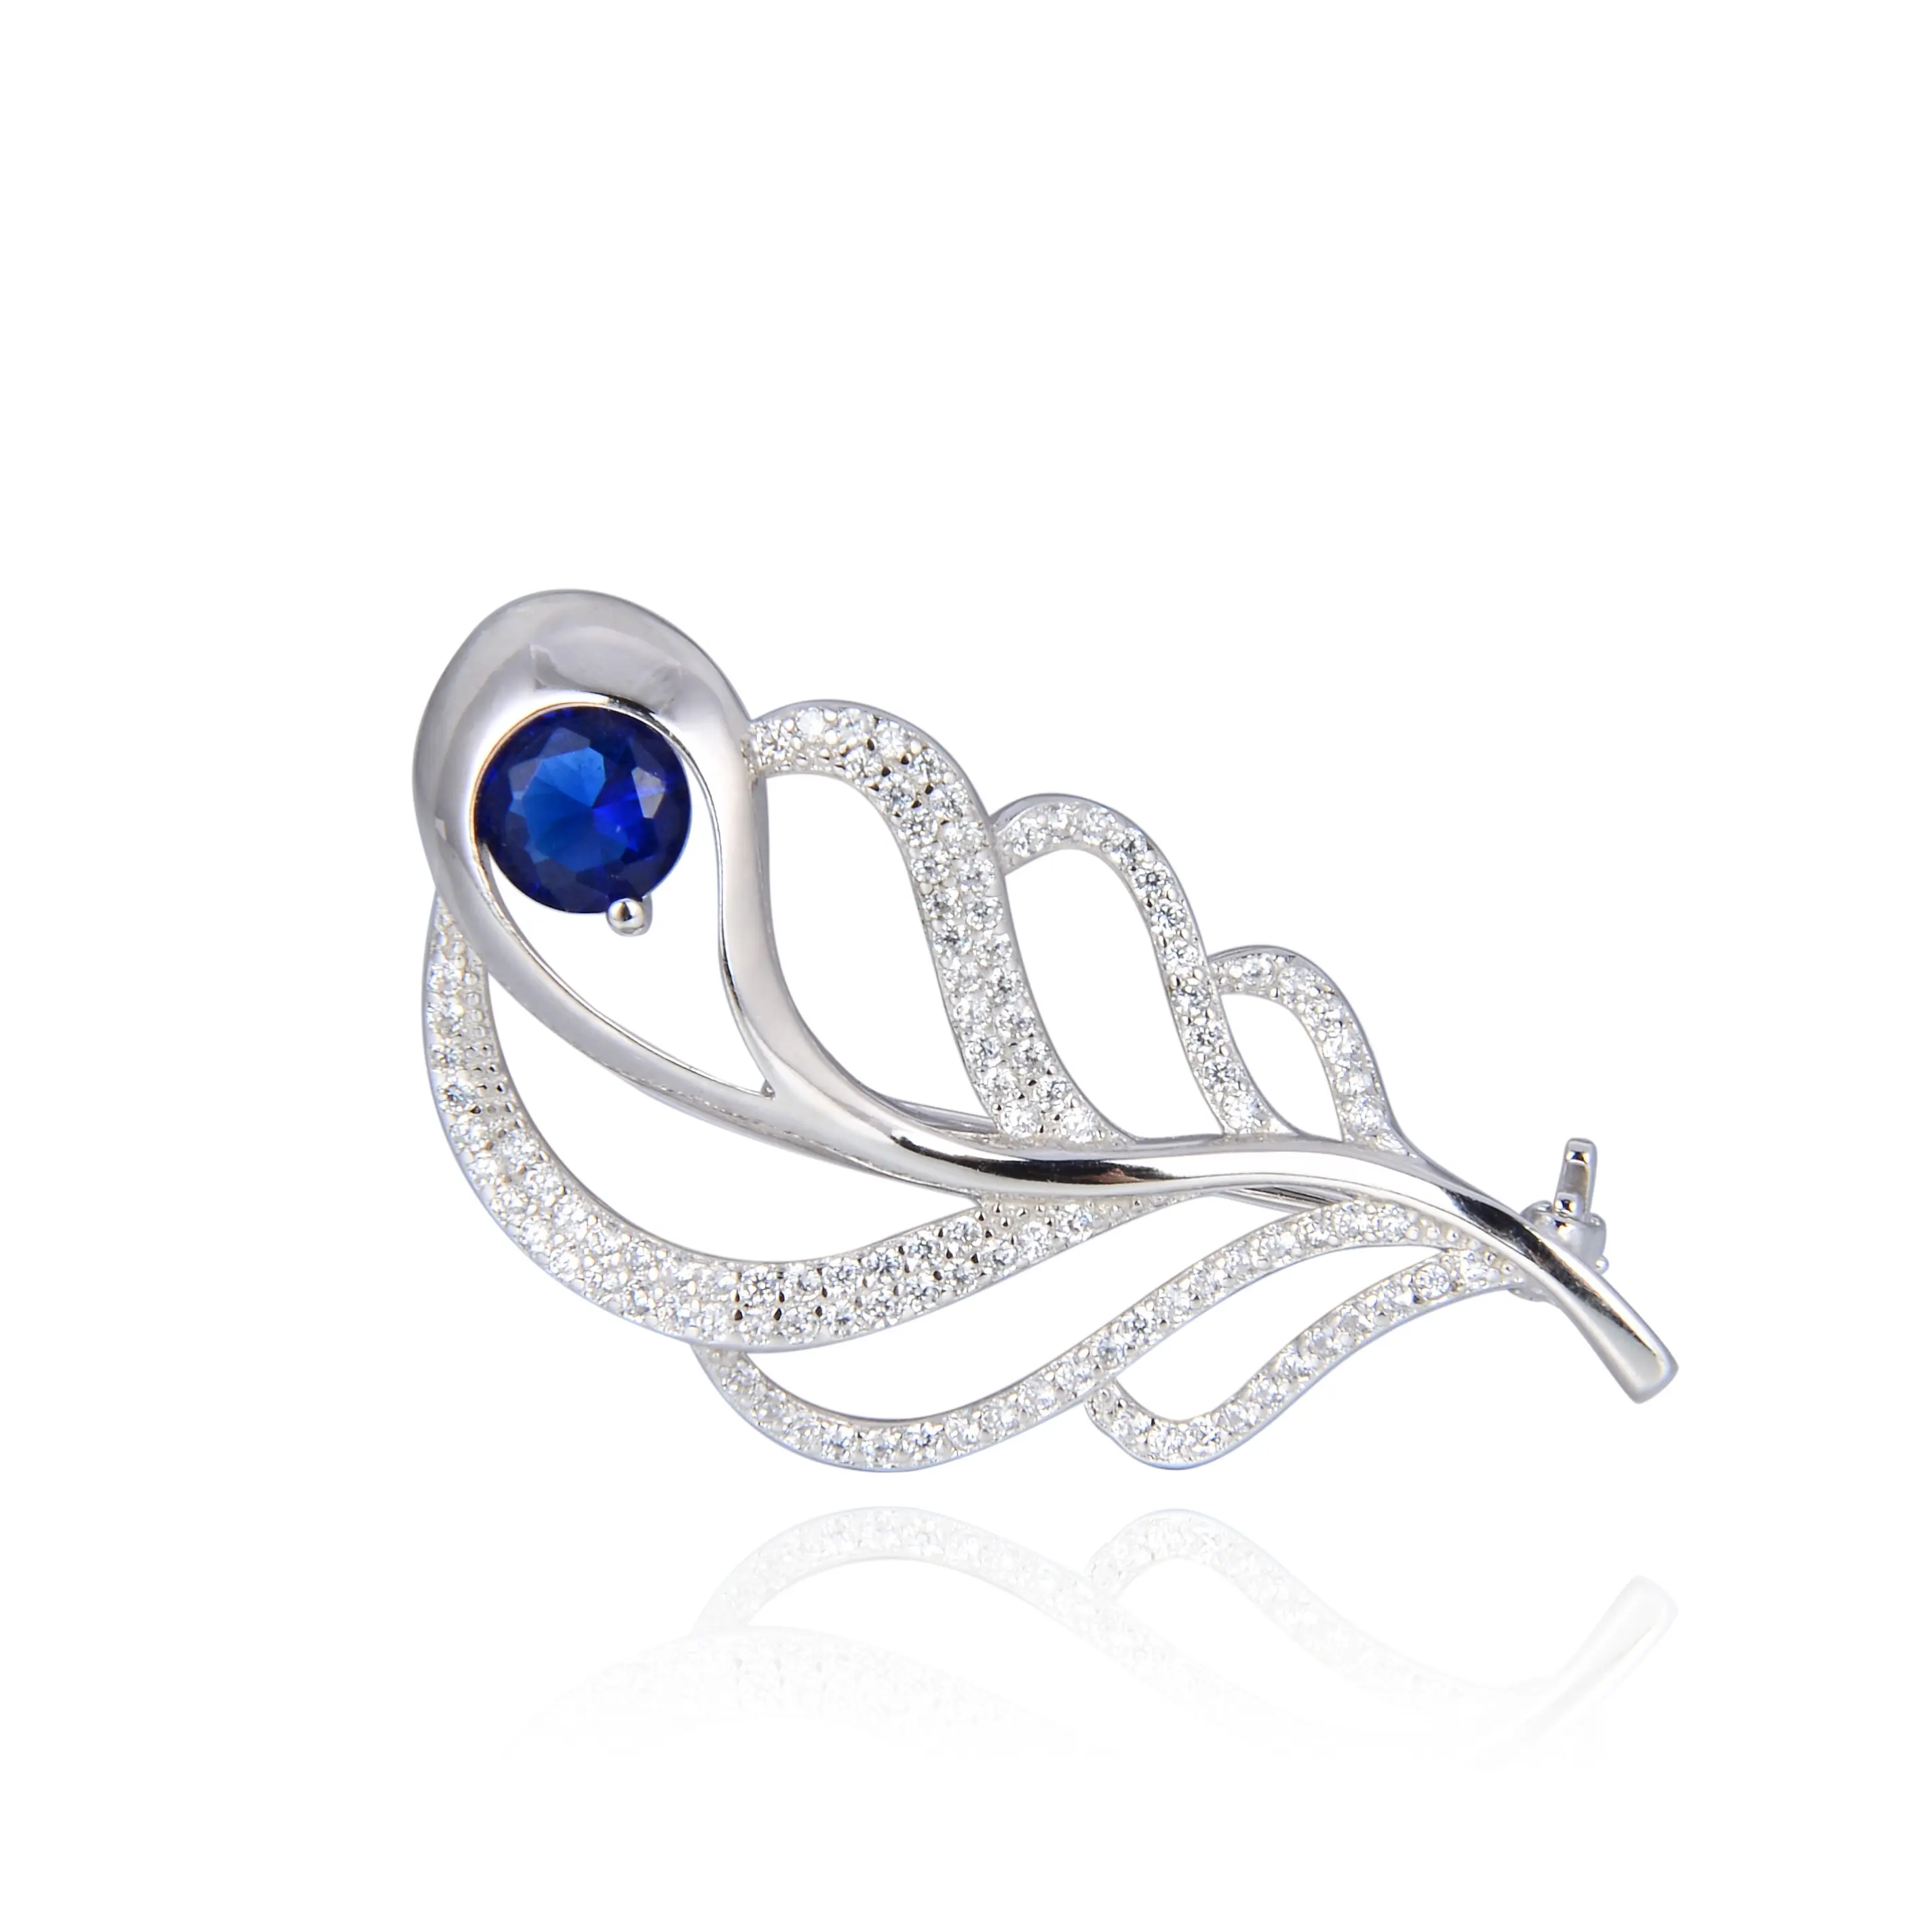 DiFeiYa 925 Sterling Silver Feather Designer Blue Gem Color With AAA Cubic Zircon Stone Unisex Brooch For Party